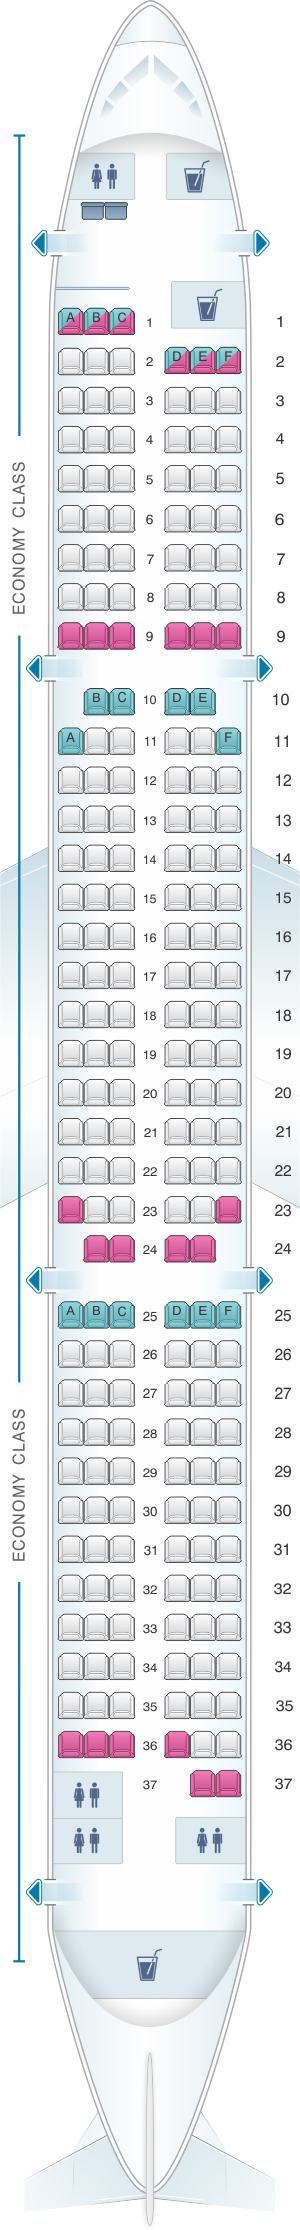 A321neo Seating Chart